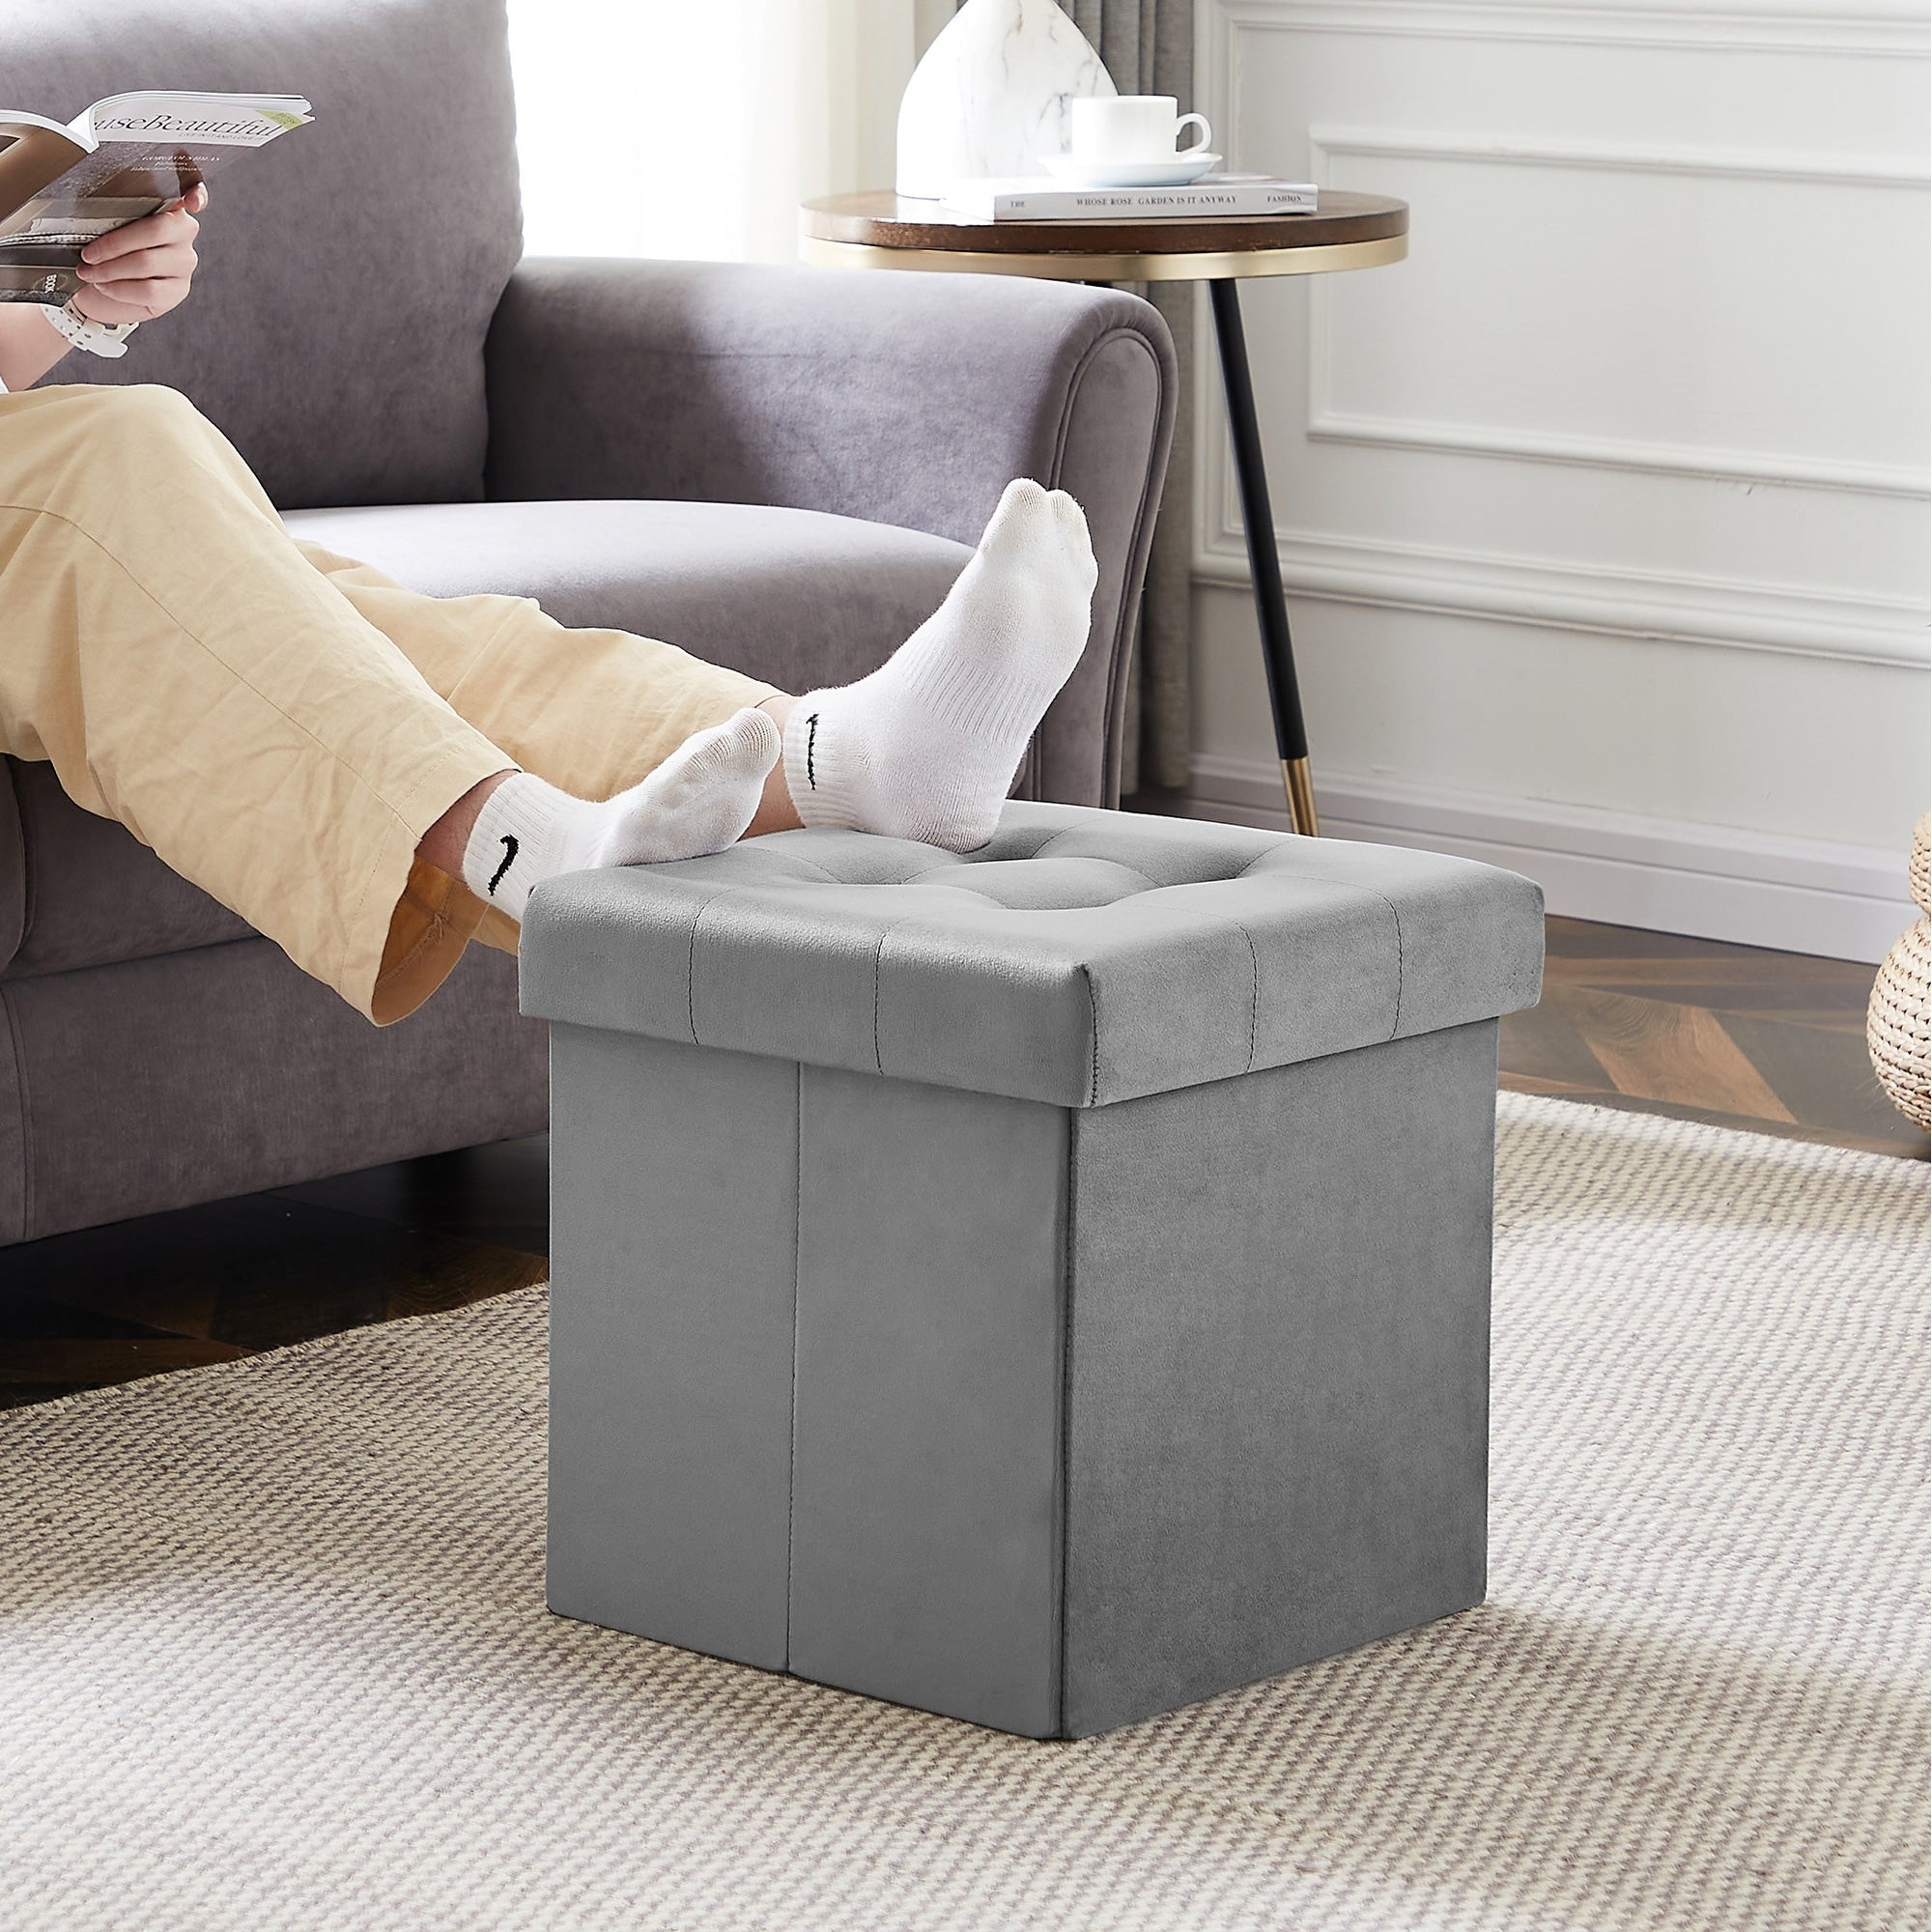 https://ak1.ostkcdn.com/images/products/is/images/direct/a83f5bb79bb34c99f5df3aa46372cebea7e46971/VECELO-Modern-Folding-Tufted-Square-Storage-Ottoman-Foot-Rest.jpg